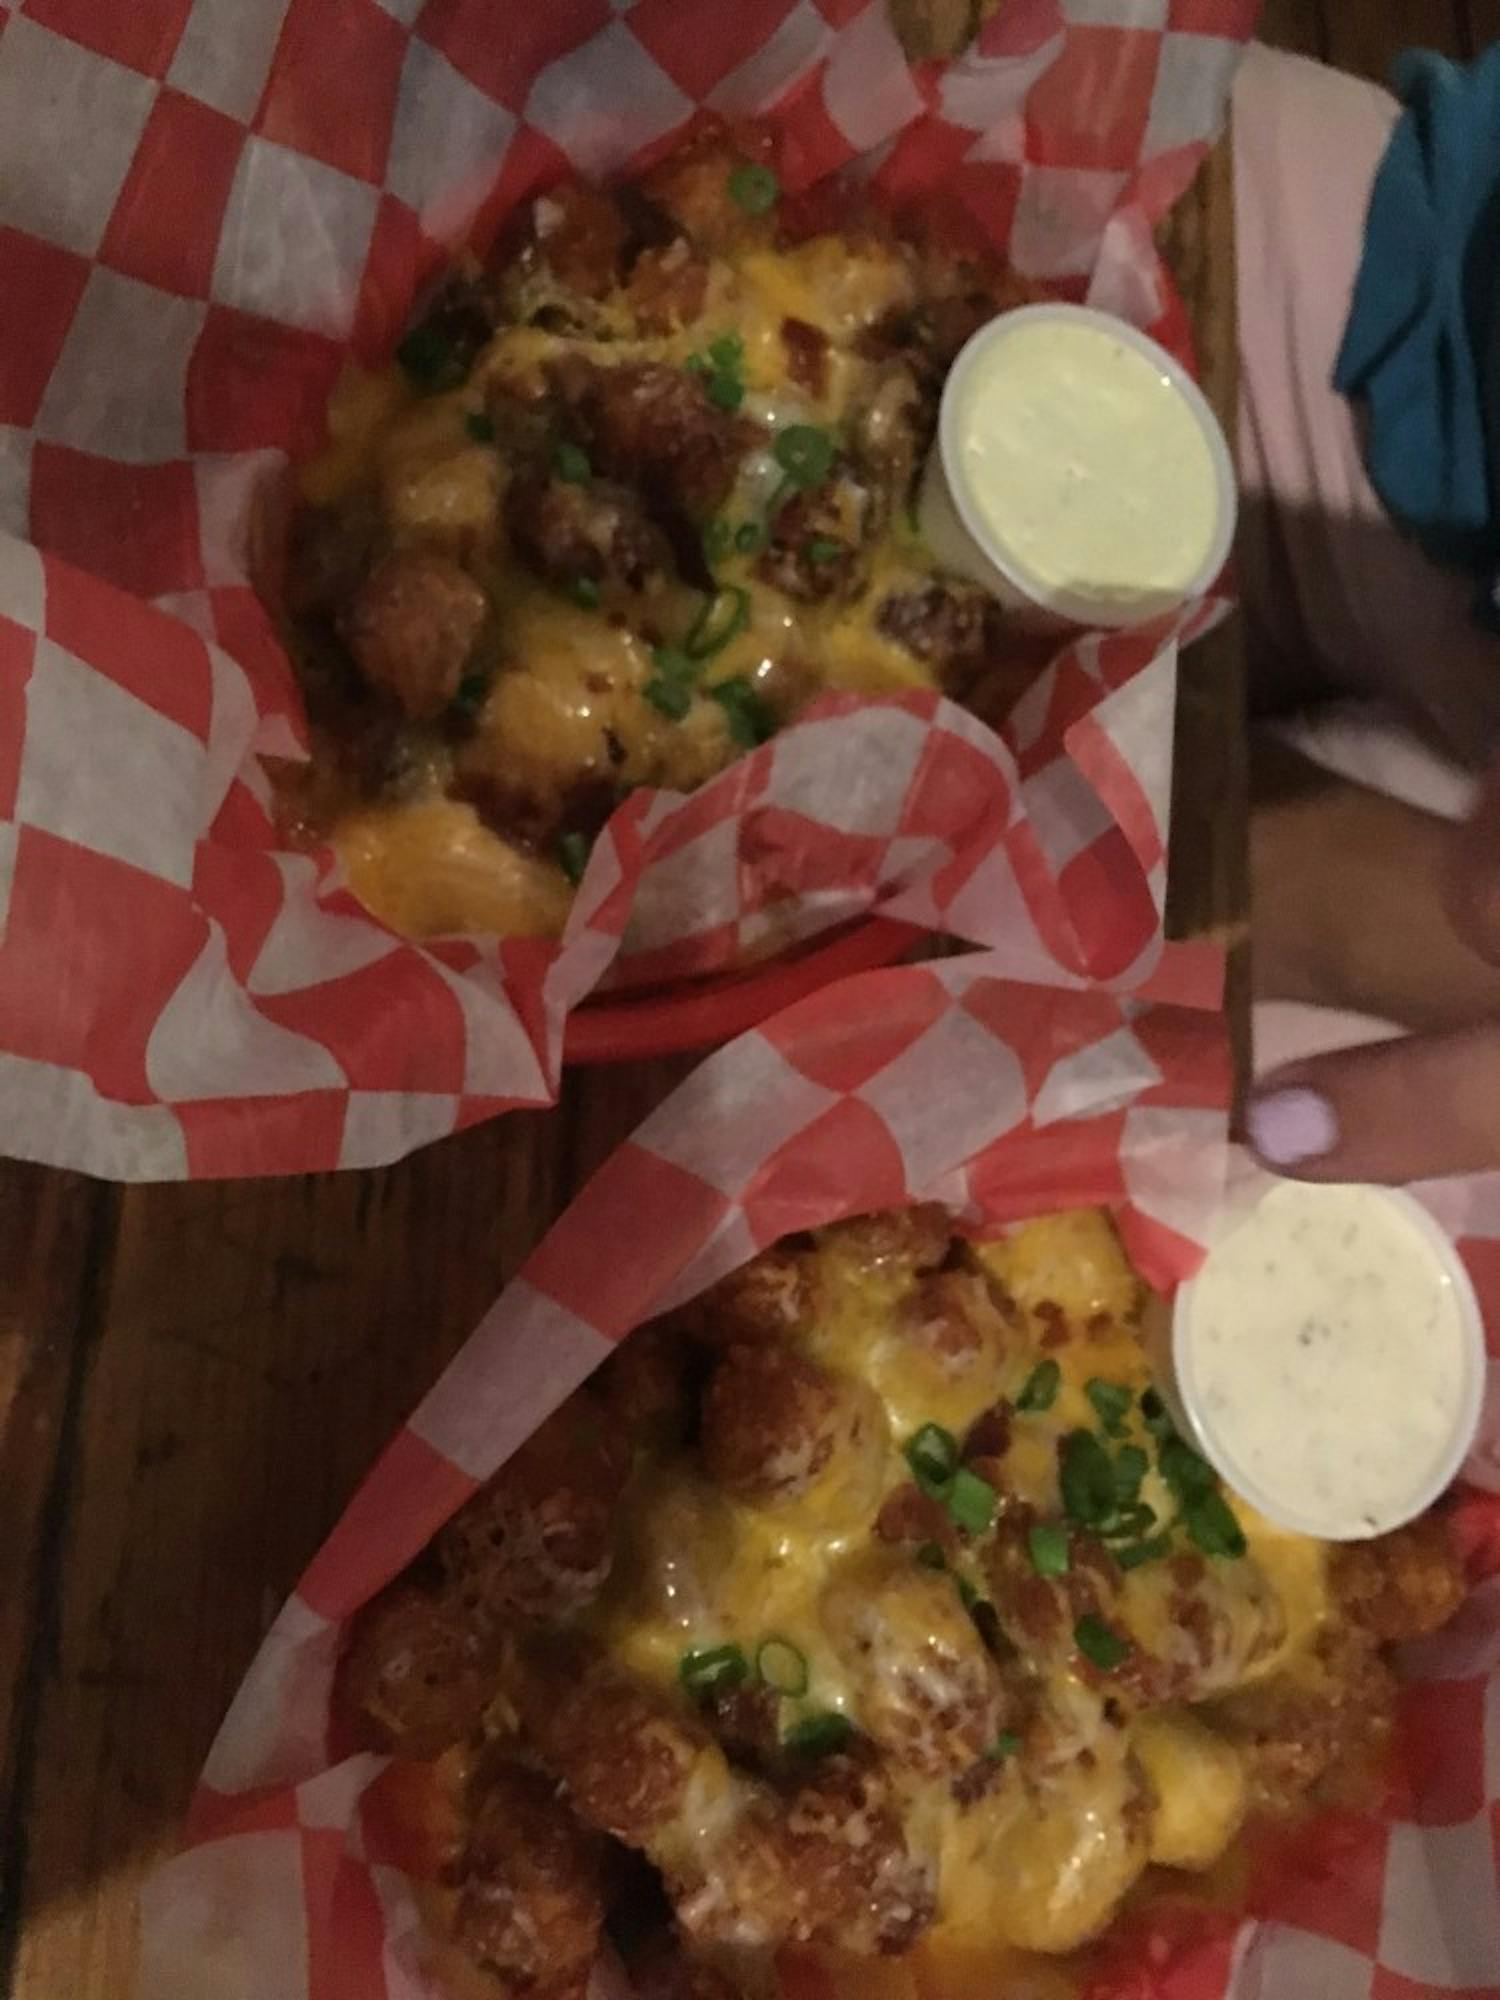 The loaded sweet potato tots, left, and the loaded regular tots at Linda's.